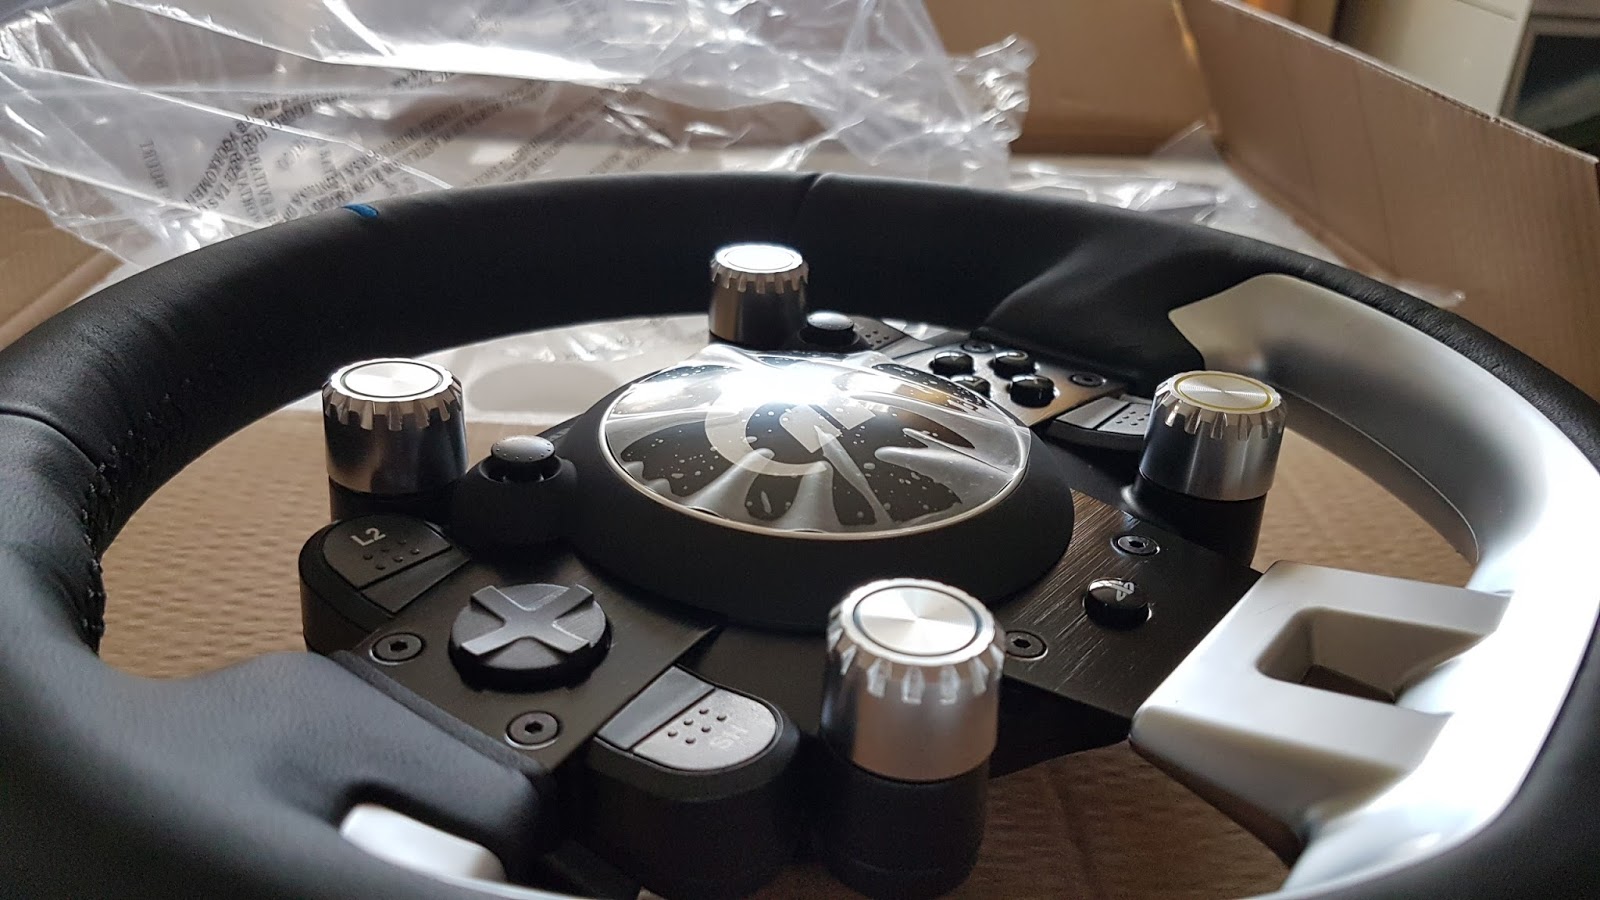 Check Out an Early Unboxing of the Thrustmaster T-GT – GTPlanet